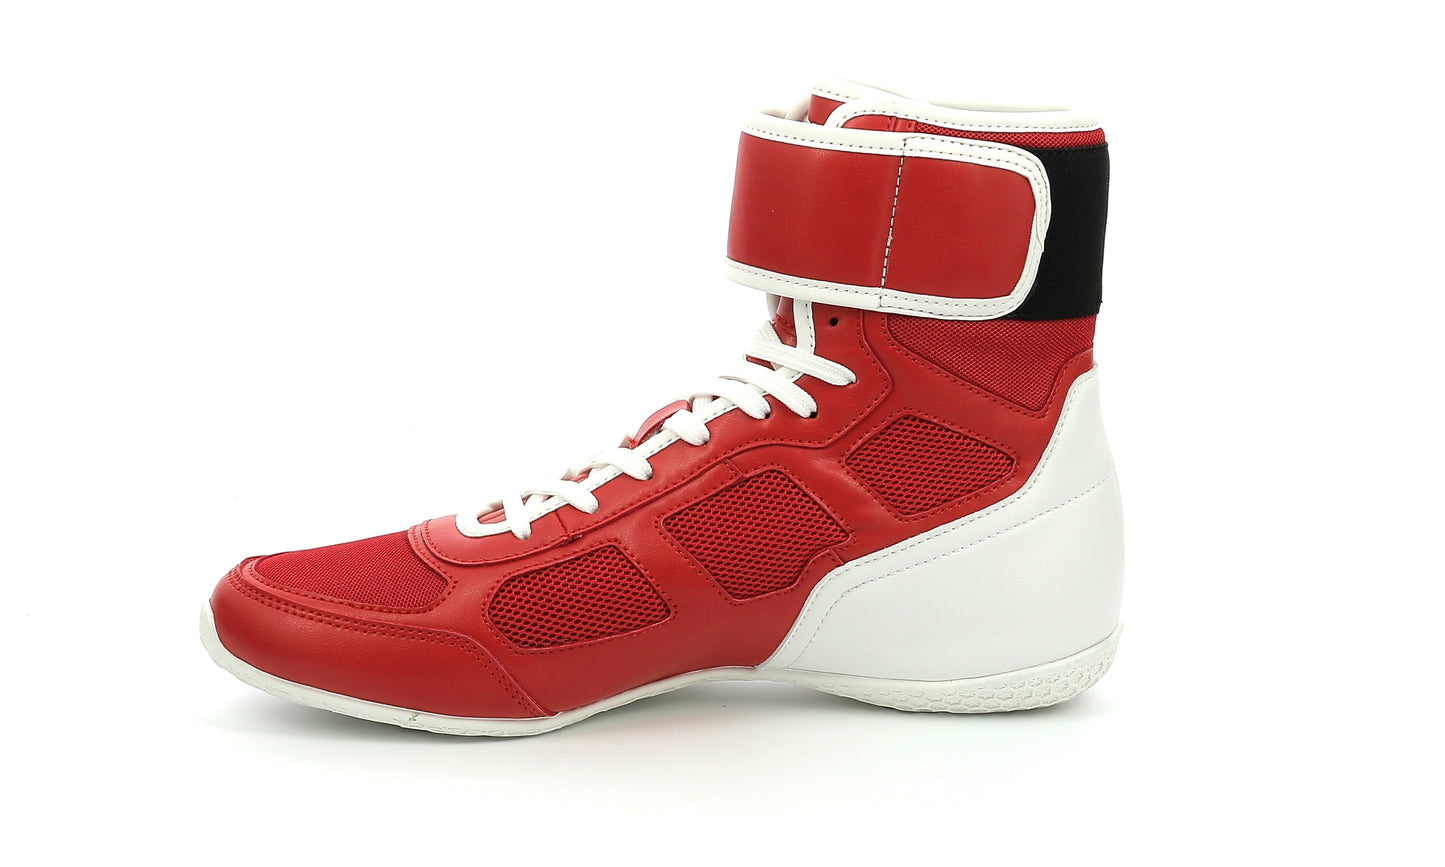 Chaussures de Boxe Everlast Ring Bling - Rouge/Blanc